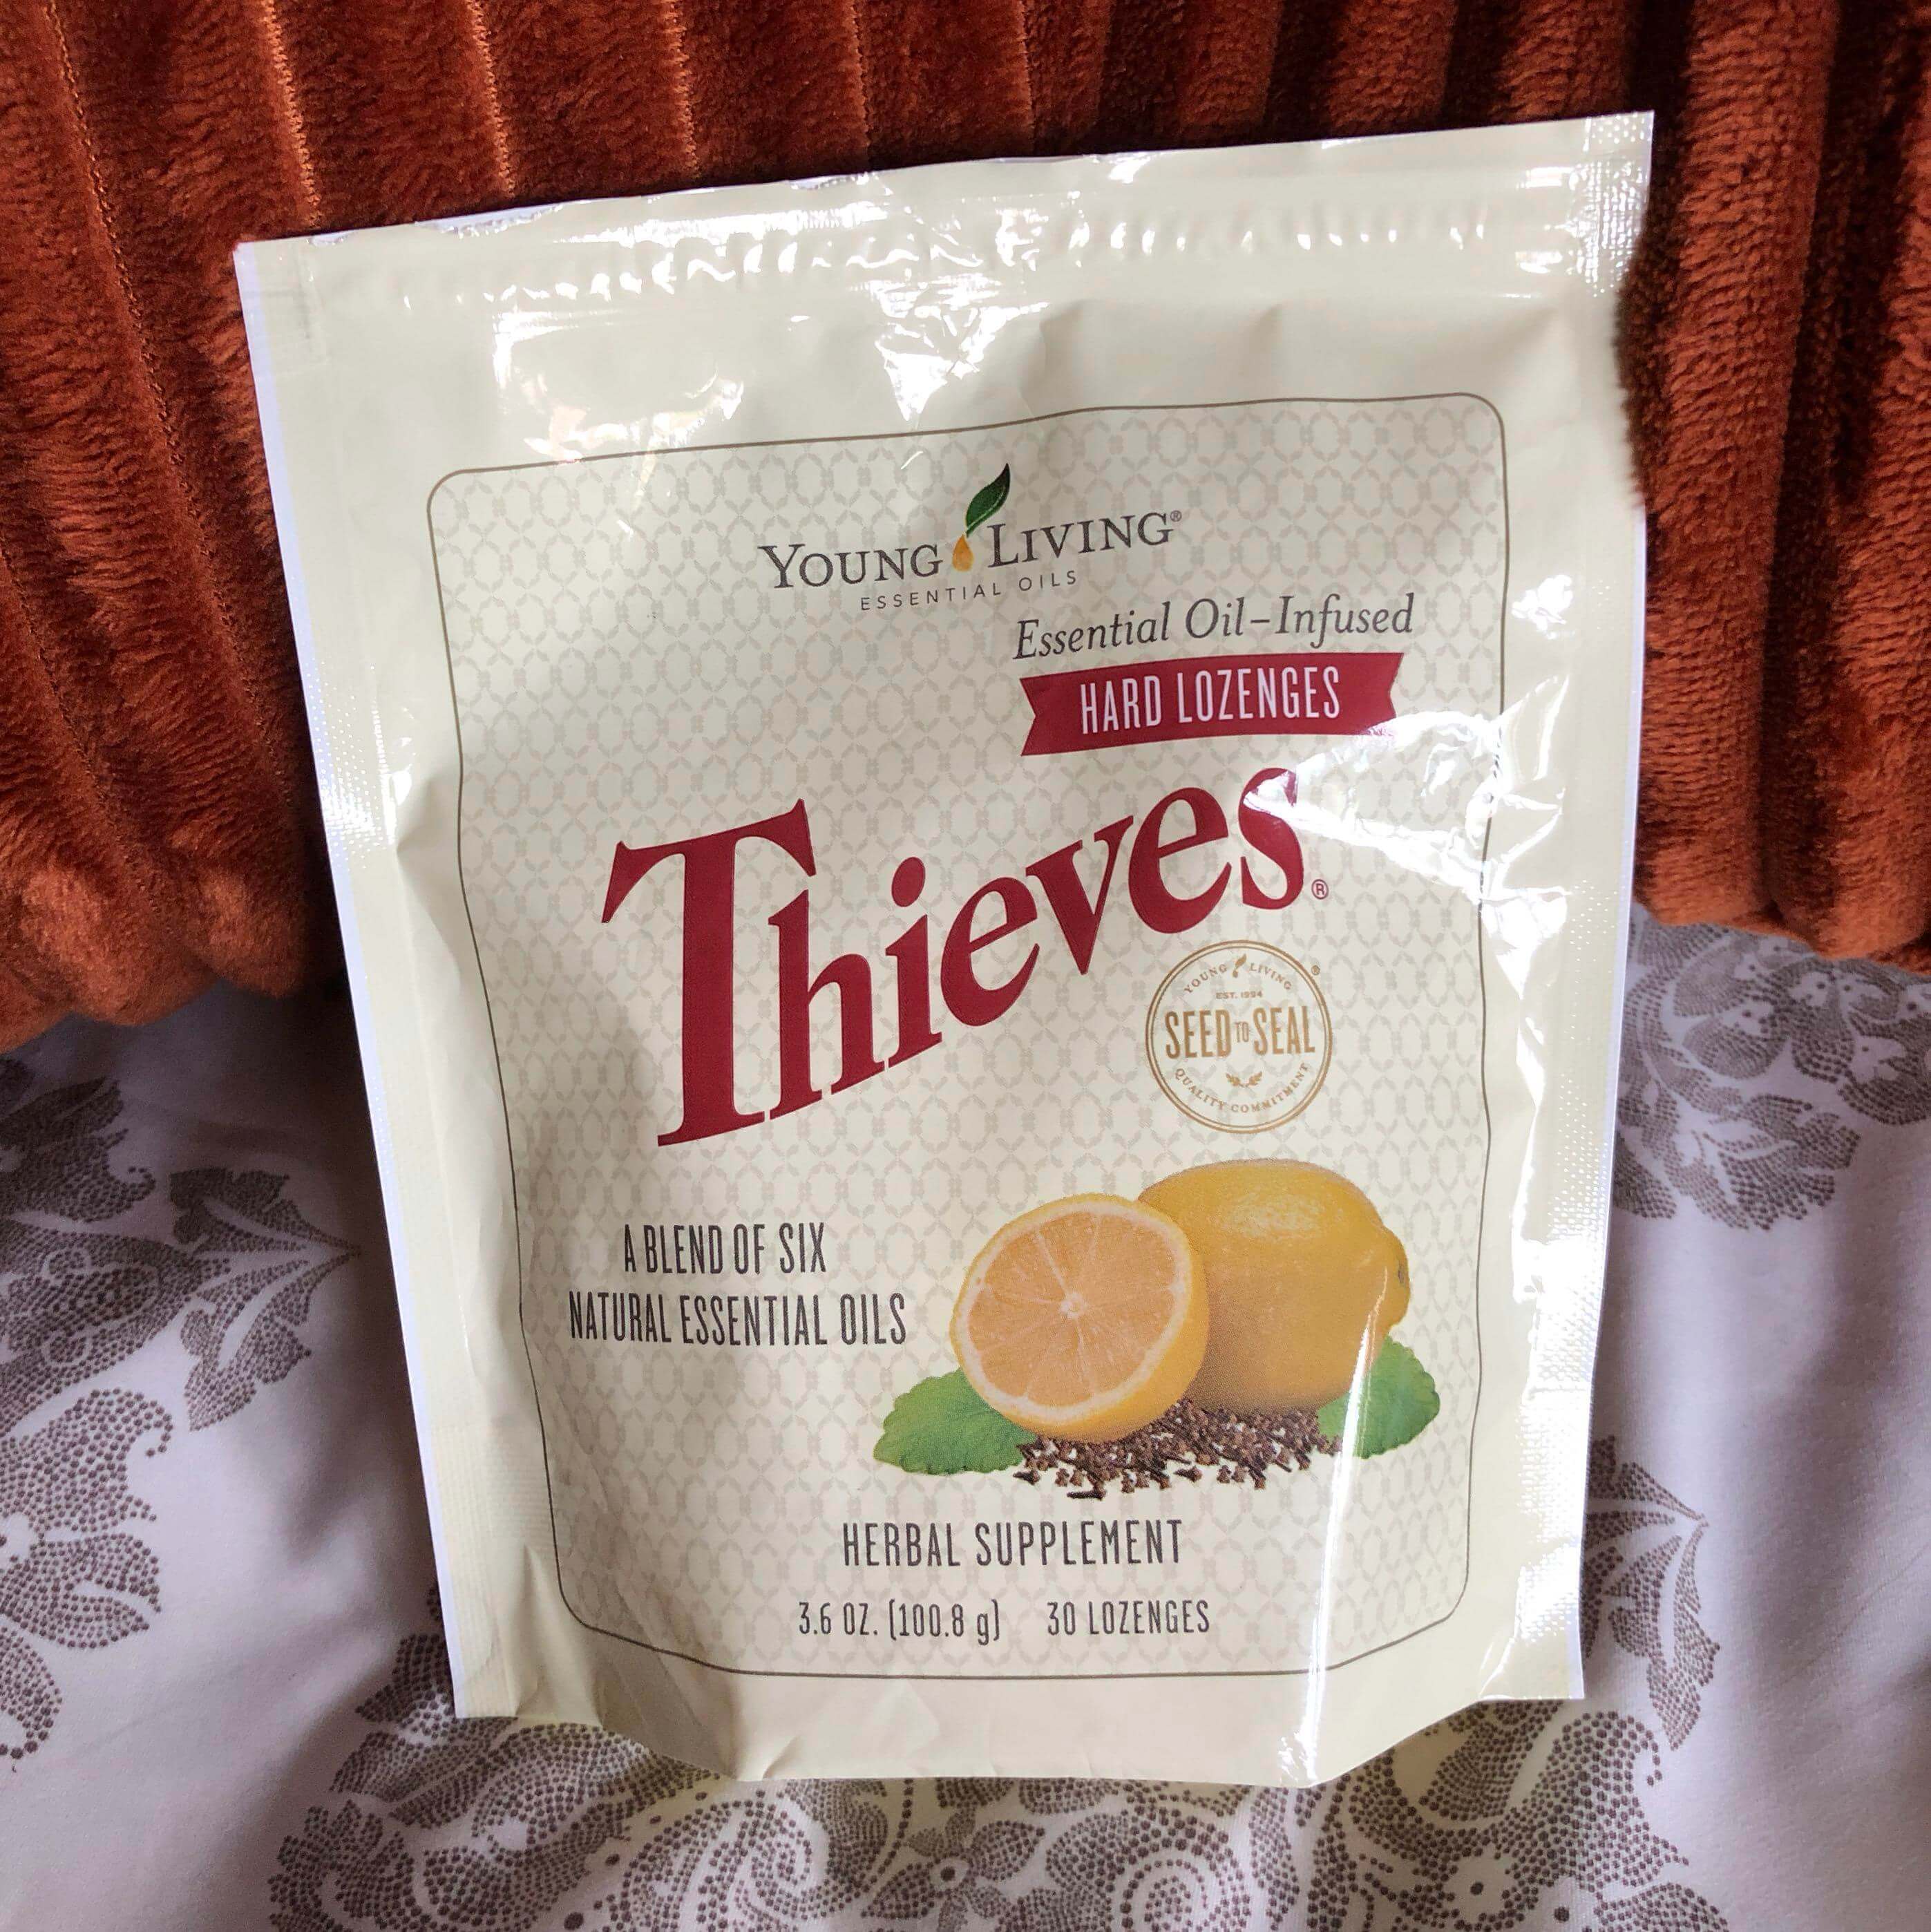 Thieves Essential Oil-Infused Cough Drops - Soothing Relief for Coughs &  Sore Throats with Young Living's Signature Blend - Natural Ingredients